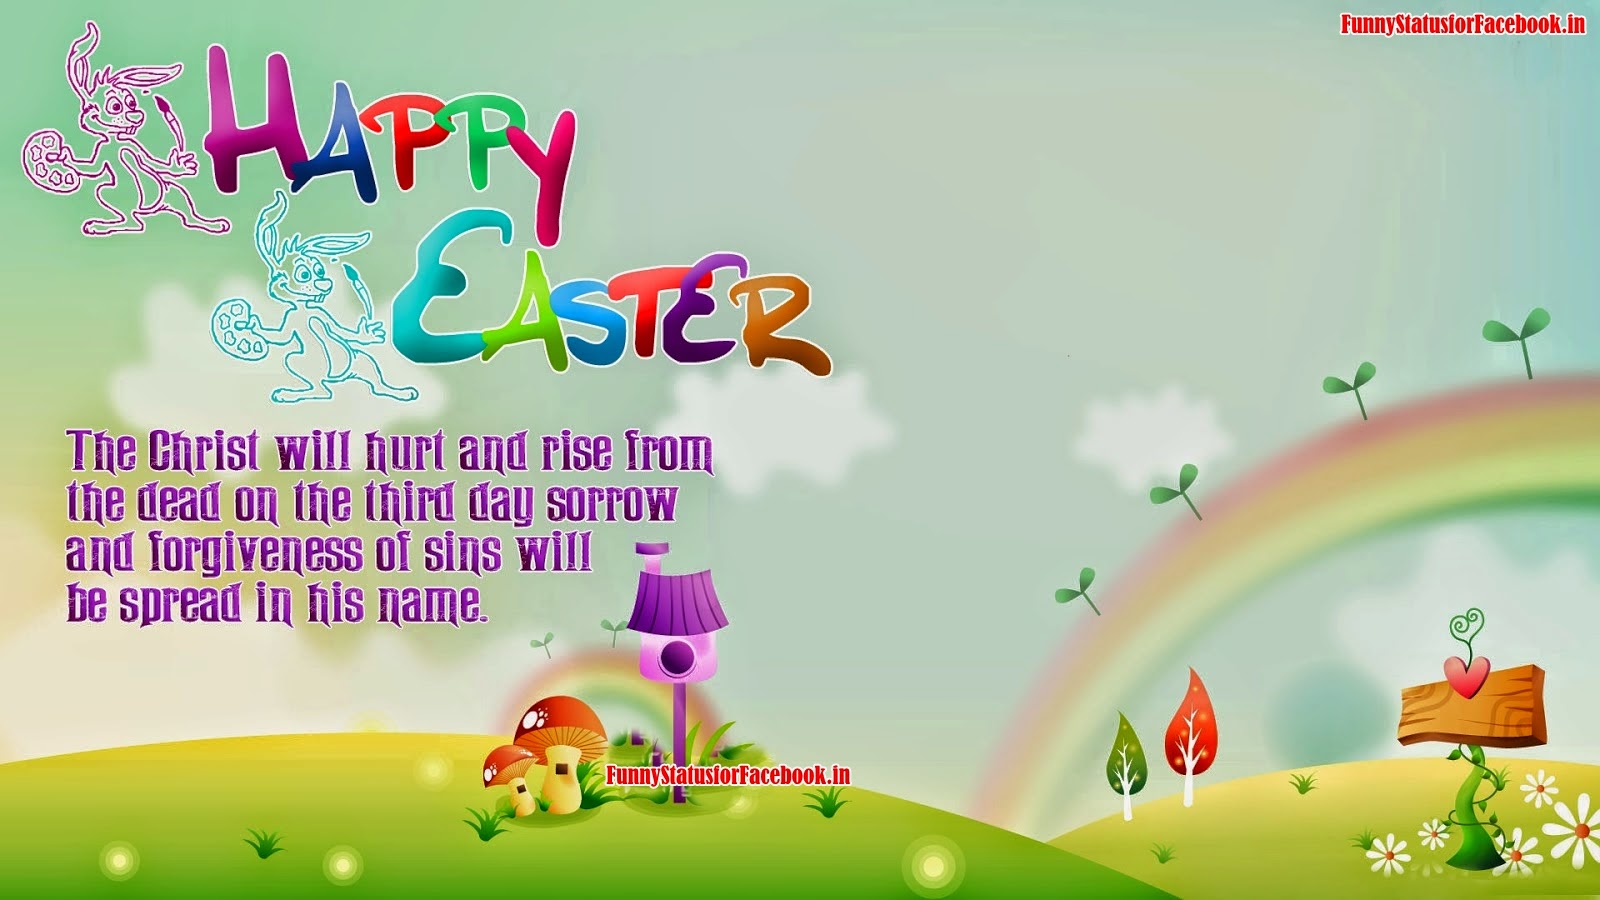 Happy Easter 2016 Desktop Wallpapers HD - Happy Easter 2016 Wishes ...